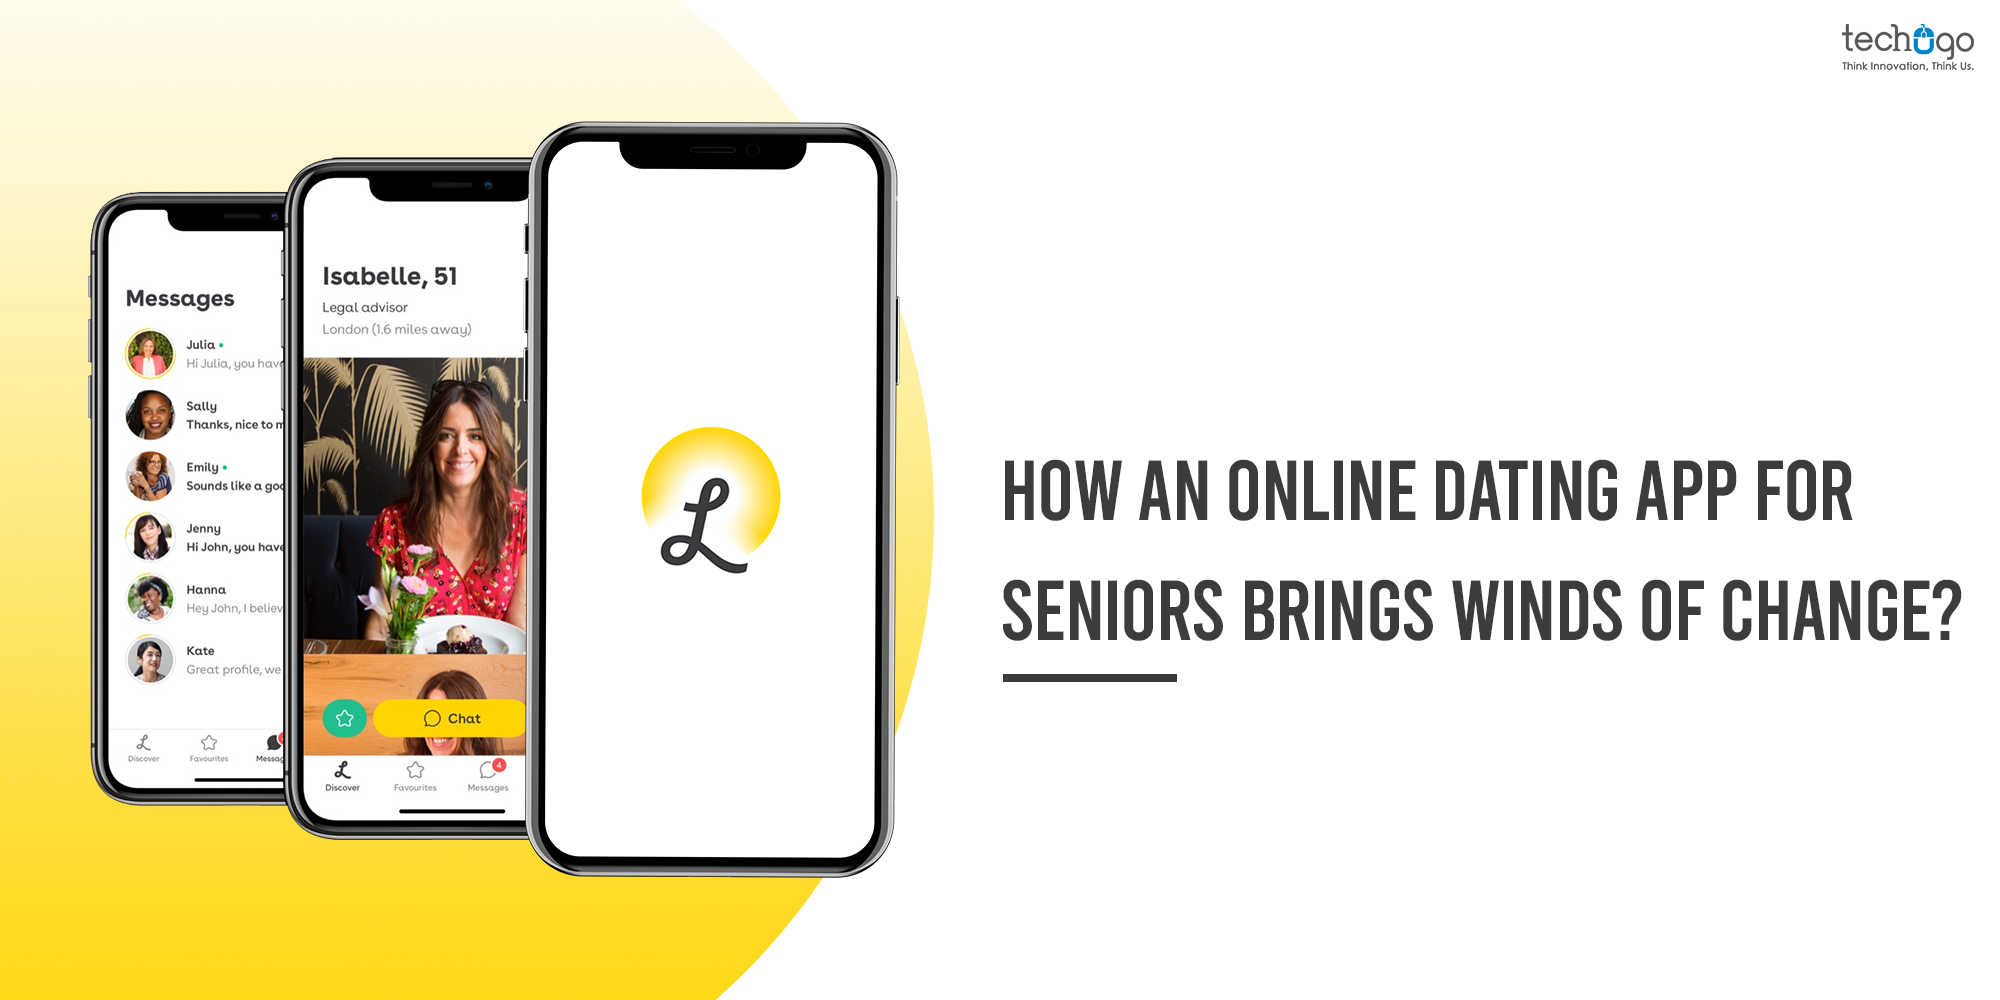 How An Online Dating App For Seniors Brings Winds Of Change?